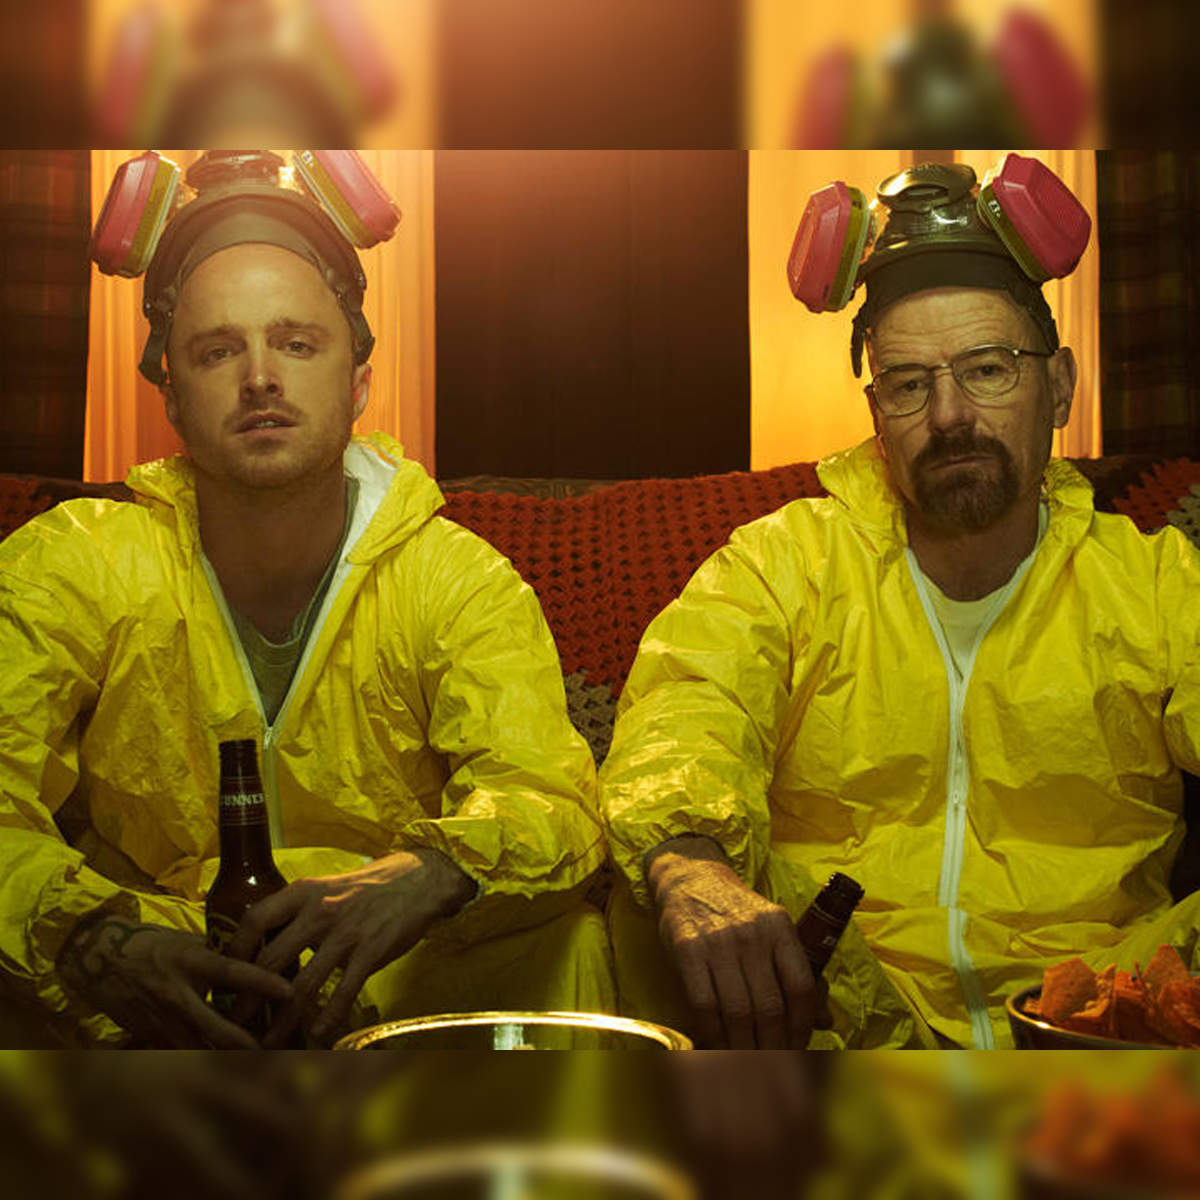 You can now buy Walter White's underwear from 'Breaking Bad